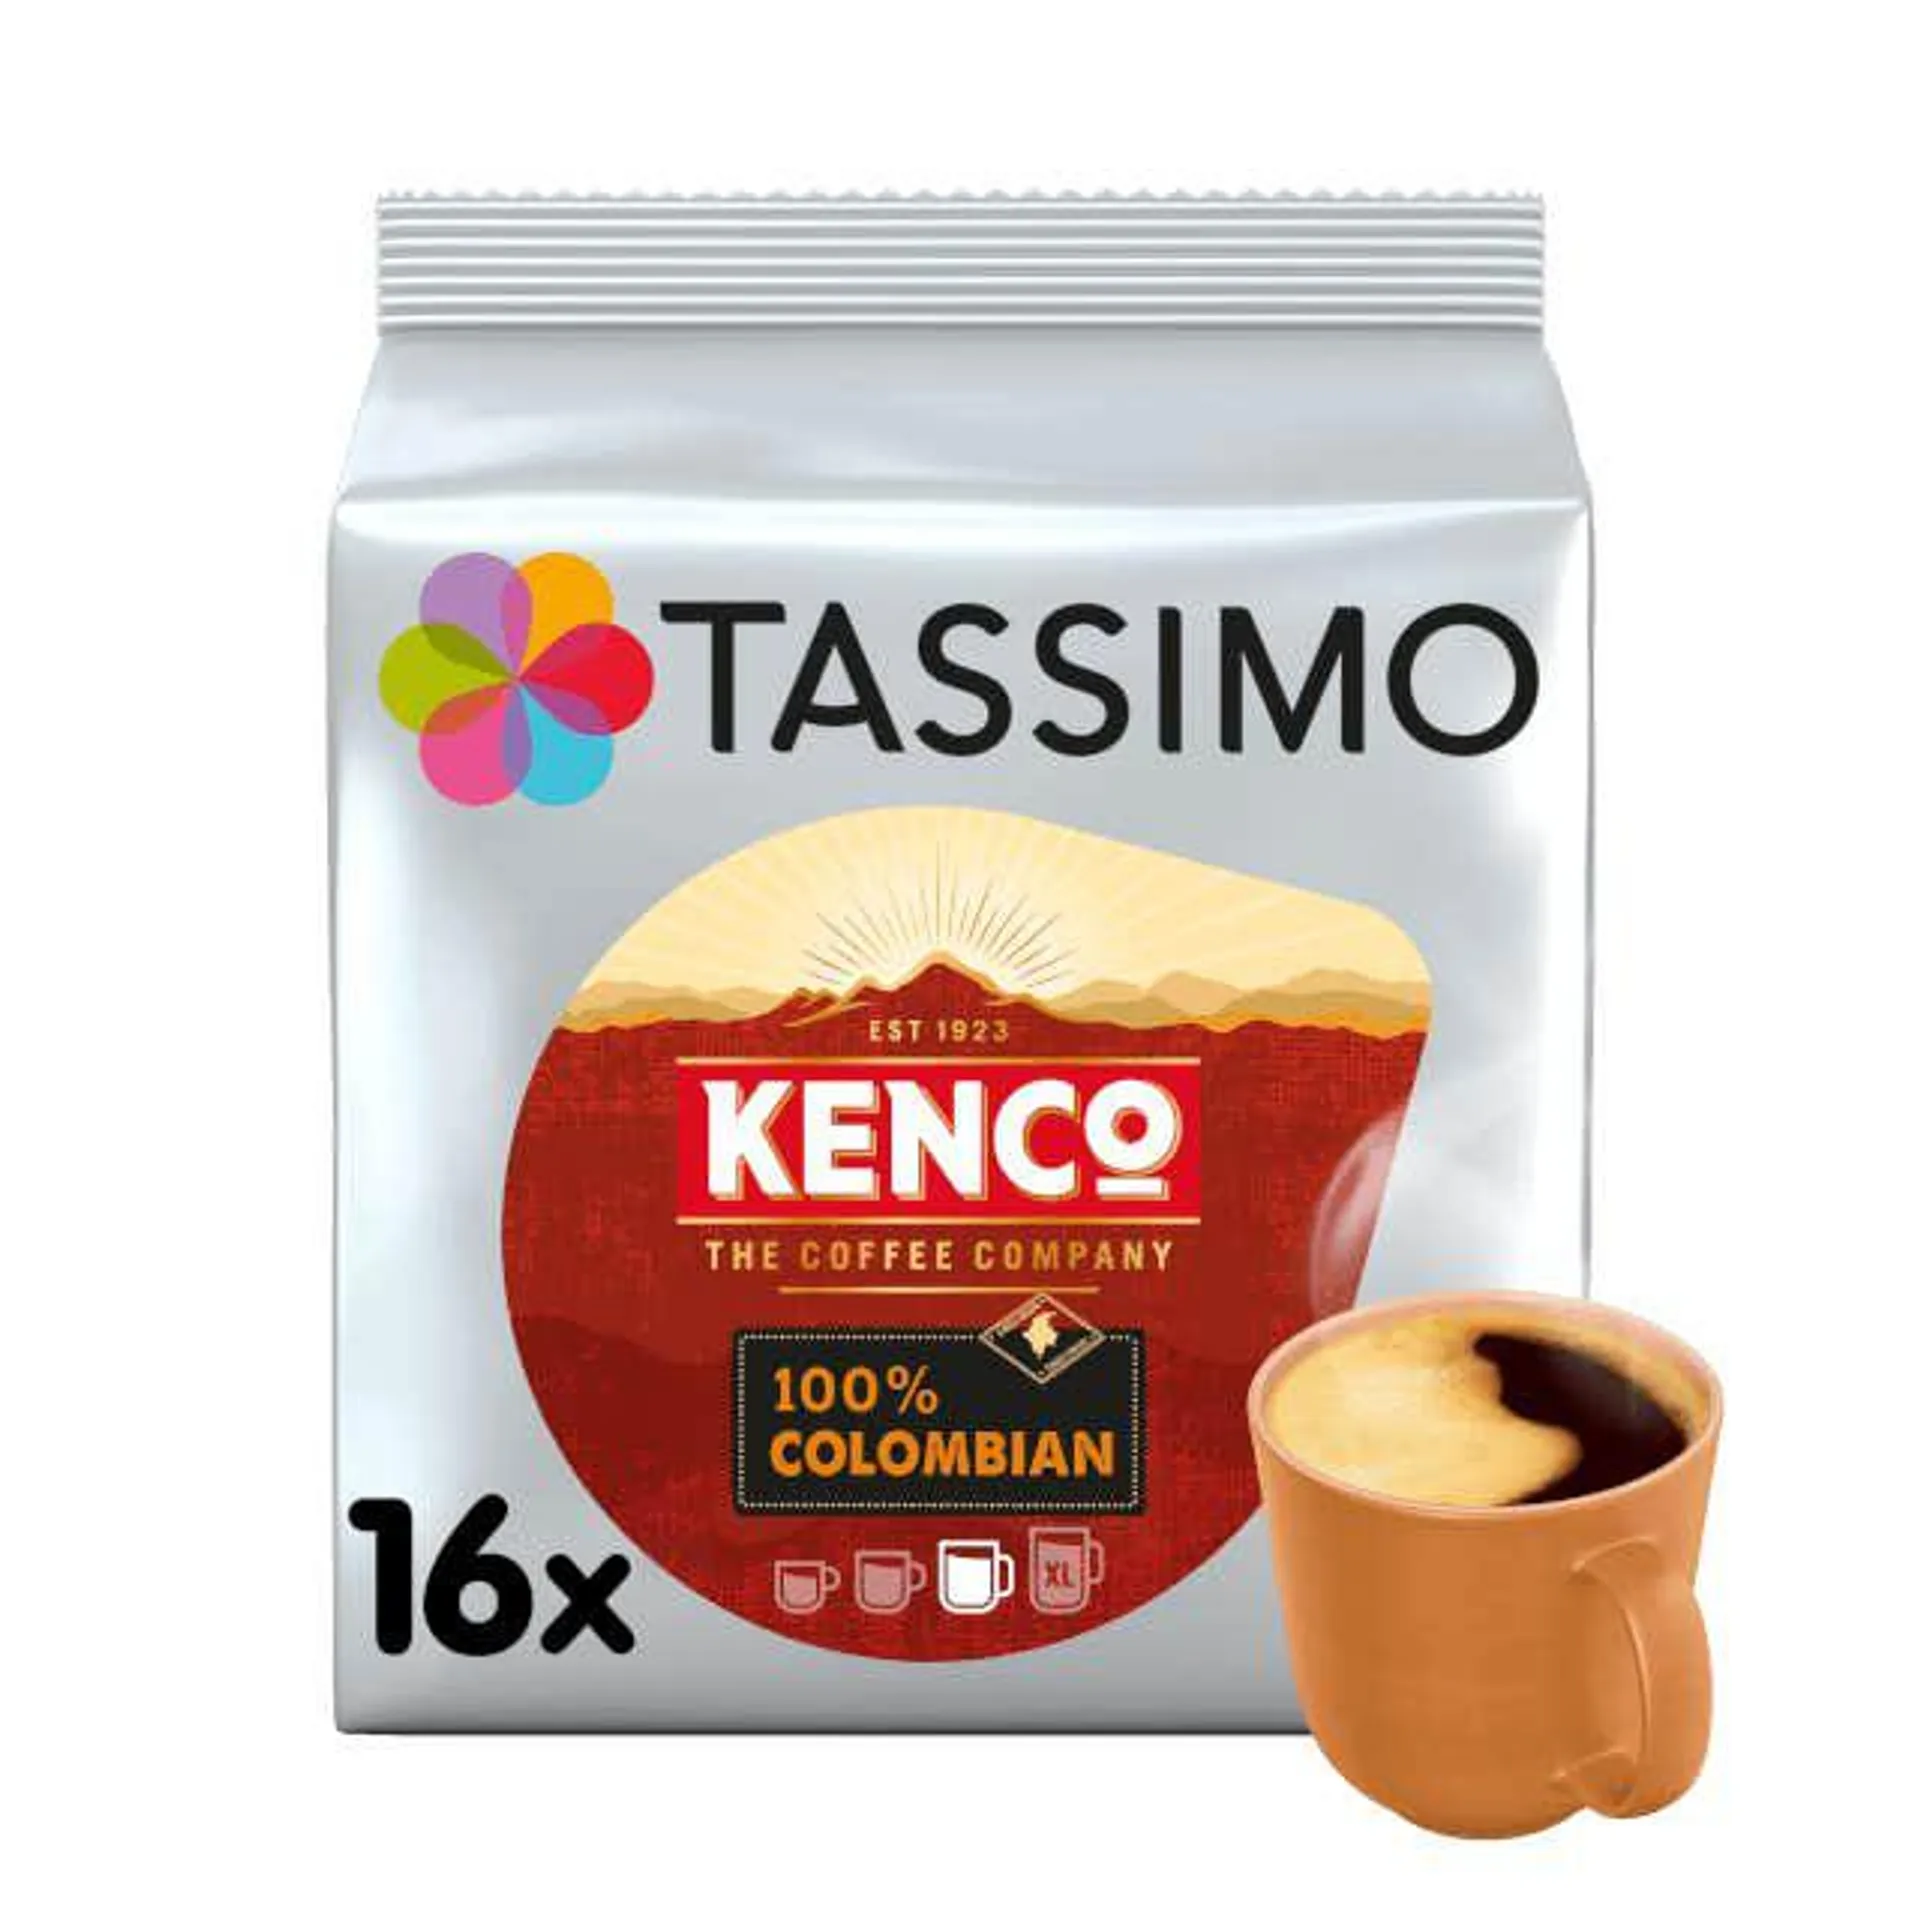 Kenco Pure Colombian